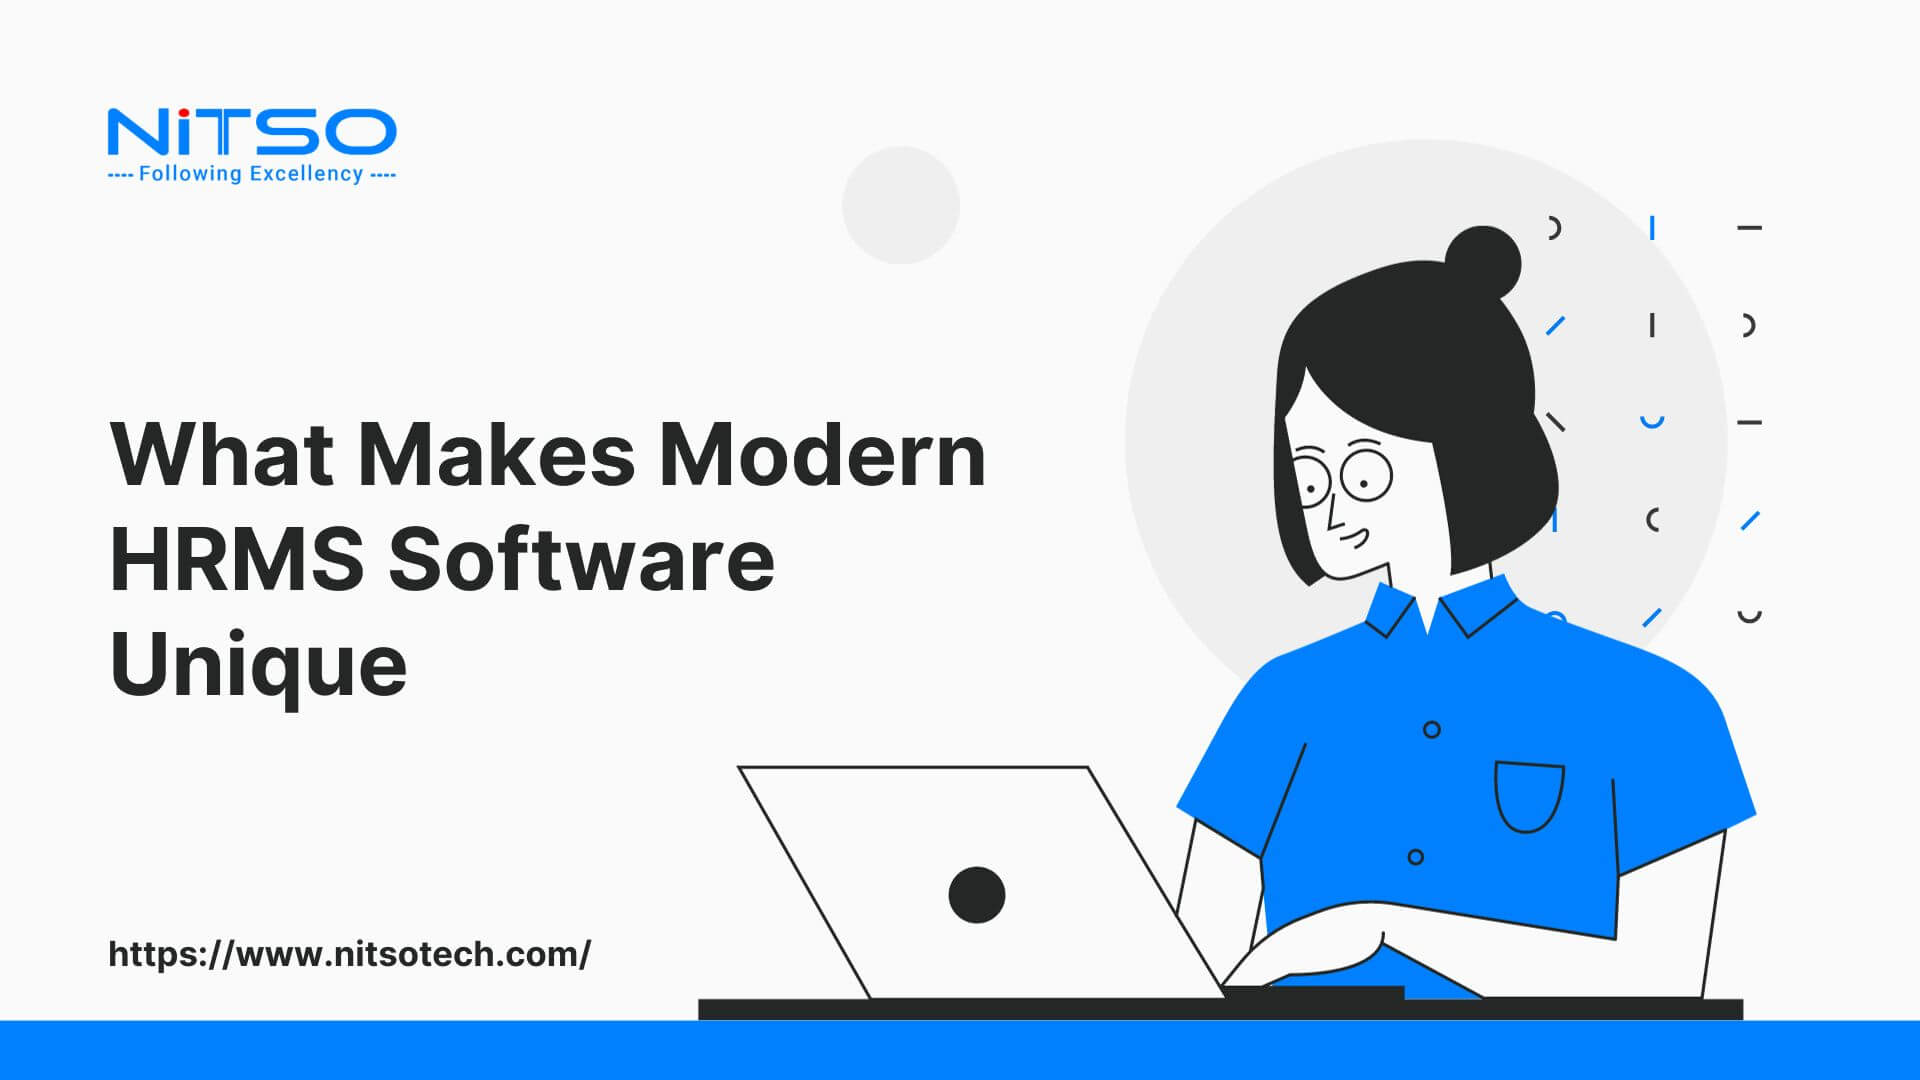 What Makes Modern HRMS Software Unique